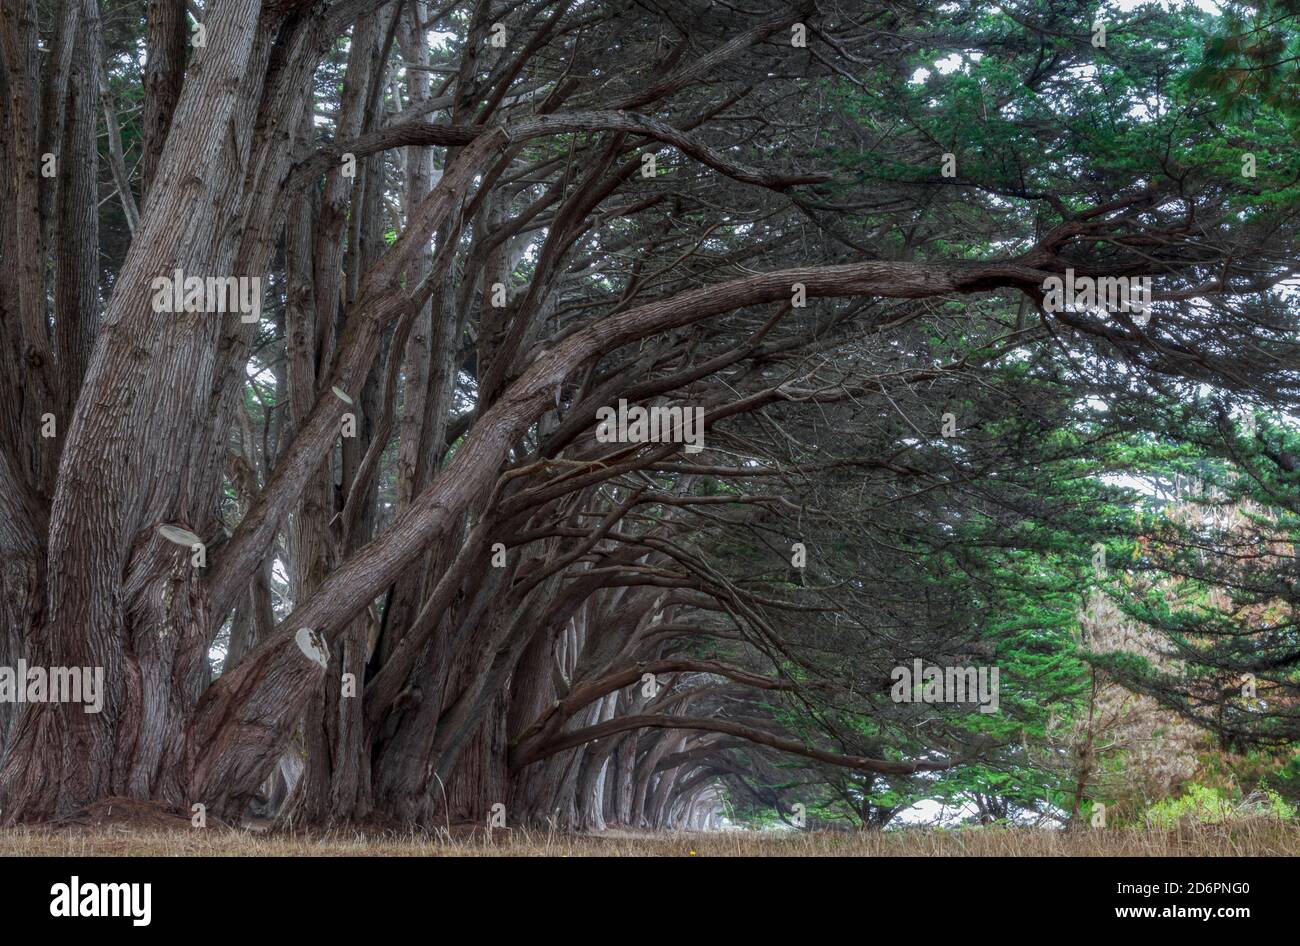 Cypress Tree Tunnel. Point Reyes National Seashore, Marin County, California, on a foggy afternoon Stock Photo